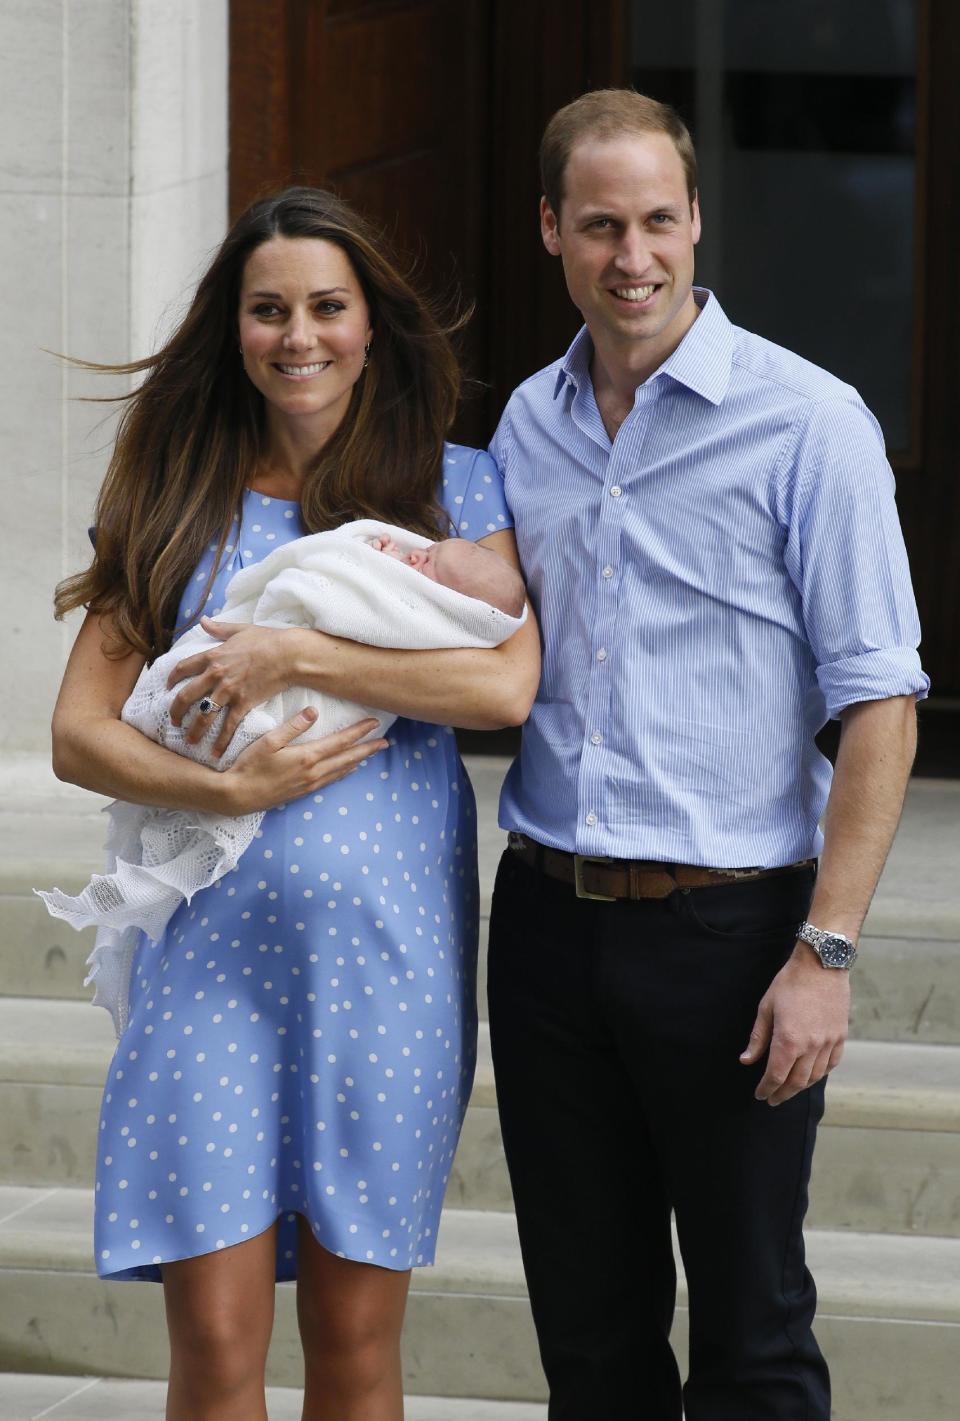 FILE - This July 23, 2013 file photo shows Britain's Prince William, right, and Kate, Duchess of Cambridge hold the Prince of Cambridge, as they pose for photographers outside St. Mary's Hospital in London where the Duchess gave birth. The boy, who is third in line to the British throne, has since been named George Alexander Louis by his parents and will be known as Prince George of Cambridge. Much has been said about the fashion sense of the Duchess of Cambridge but in 2013 it was something a bit different that caught our eye. Peeking out under her blue-and-white polka dot dress as she emerged from the hospital just after childbirth was a pronounced "mommy tummy," a perfectly normal development but something most celebrities keep under wraps, until their personal trainers have whipped them back into magazine-cover shape. (AP Photo/Kirsty Wigglesworth, File)